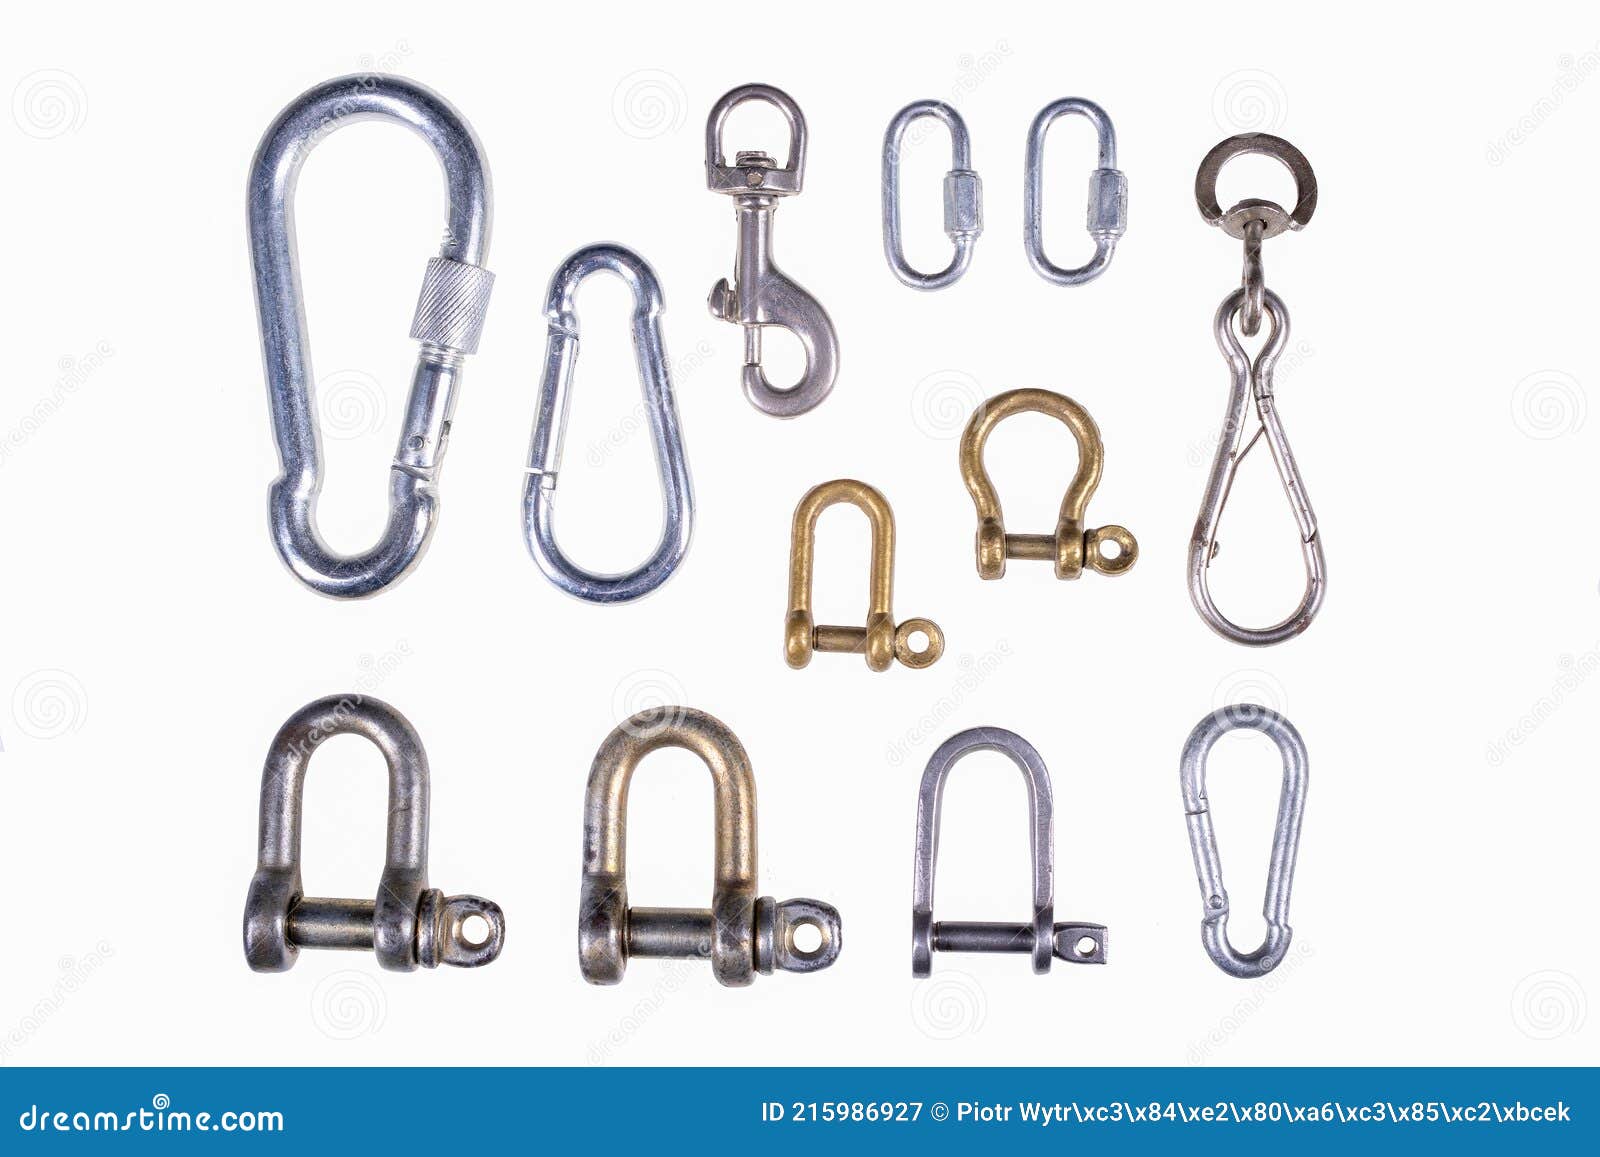 https://thumbs.dreamstime.com/z/metal-shackles-slings-used-sailboat-accessories-joining-ropes-sailing-metal-shackles-slings-used-sailboat-215986927.jpg